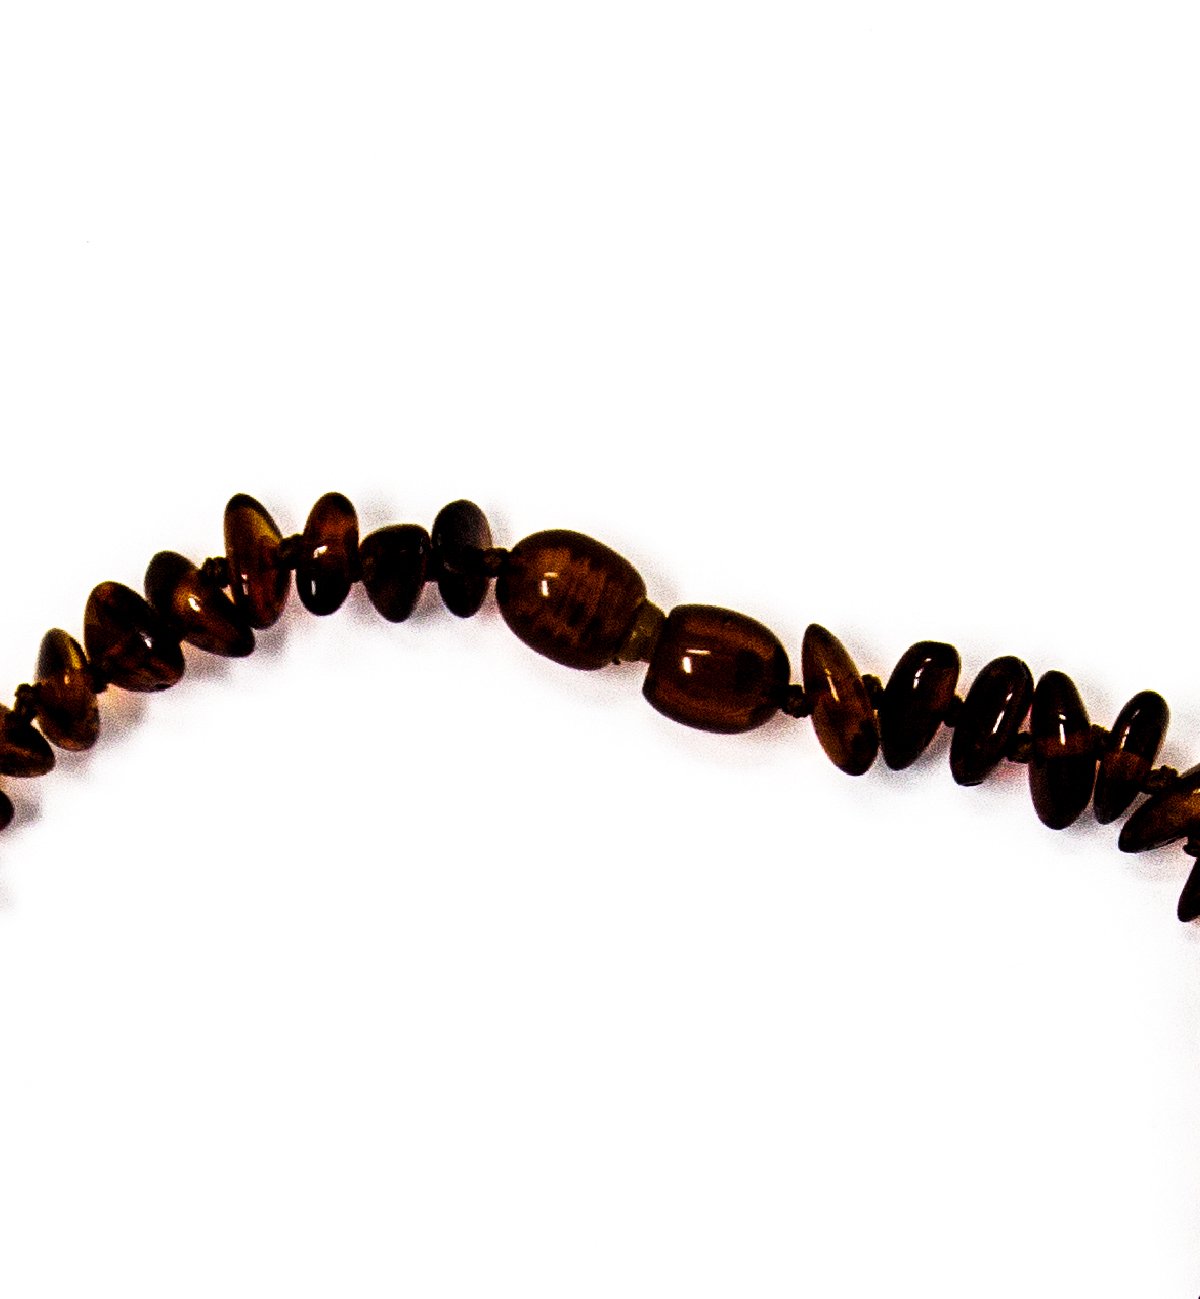 Brown amber necklace for baby with secure clasp